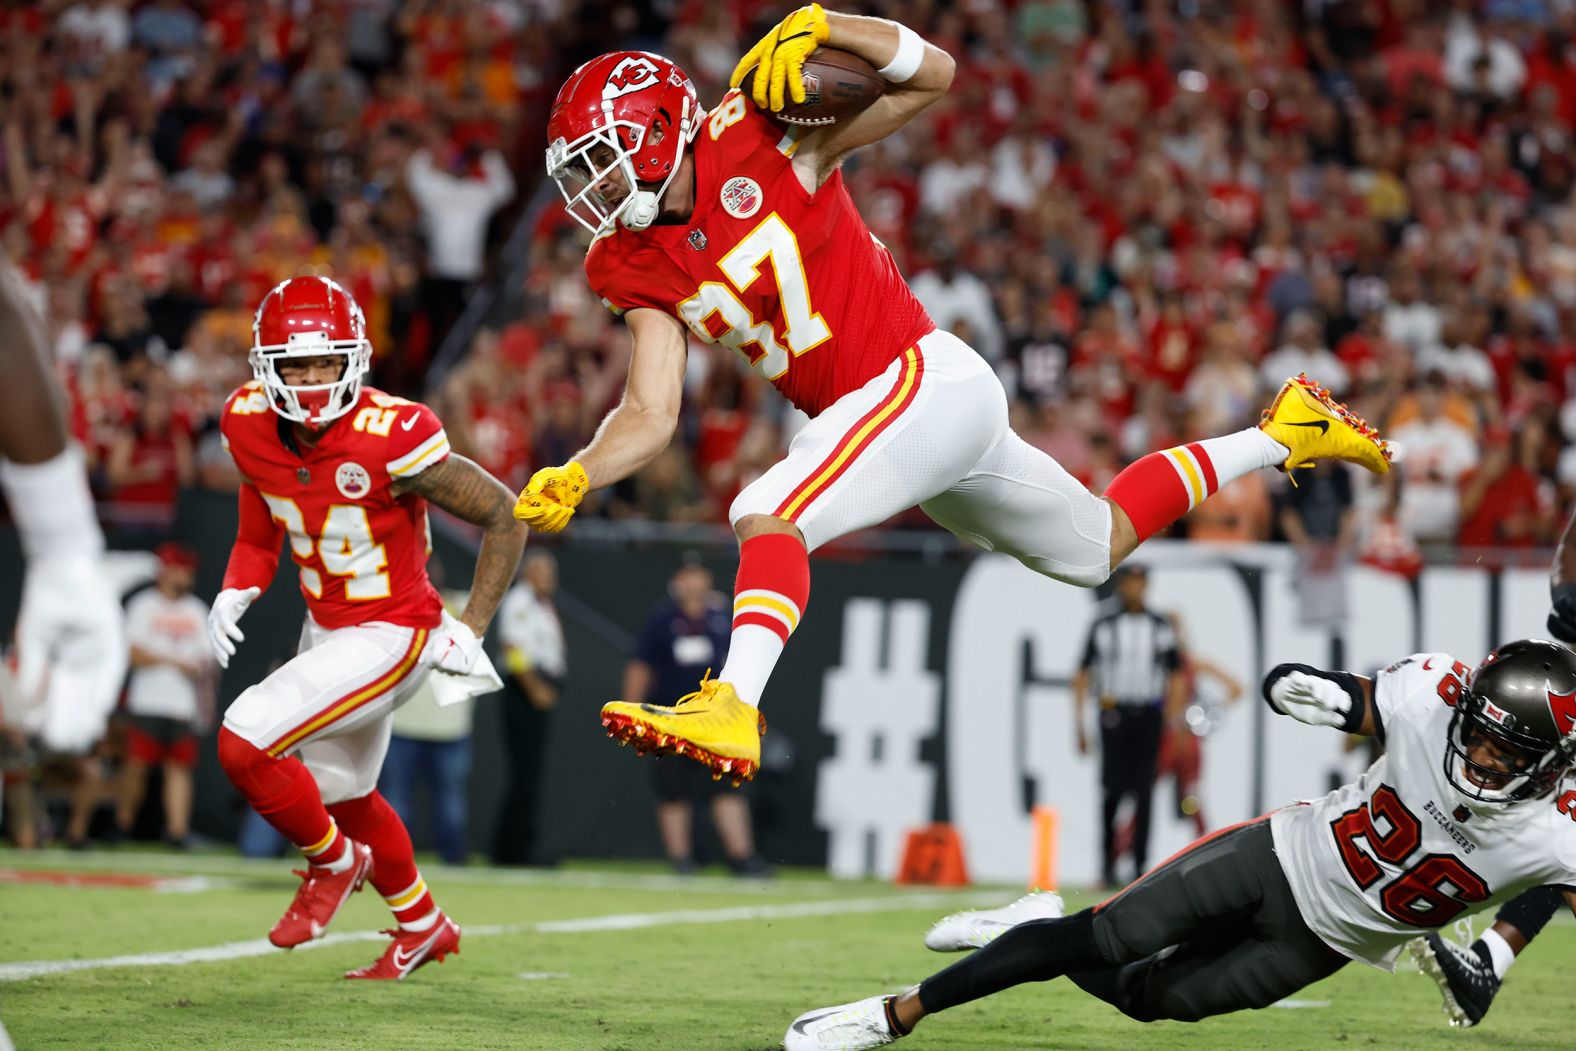 Kansas City Chiefs tight end Travis Kelce runs the ball in for a touchdown against the Tampa Bay Buccaneers on Sunday, October 2. The Chiefs won 41-31.